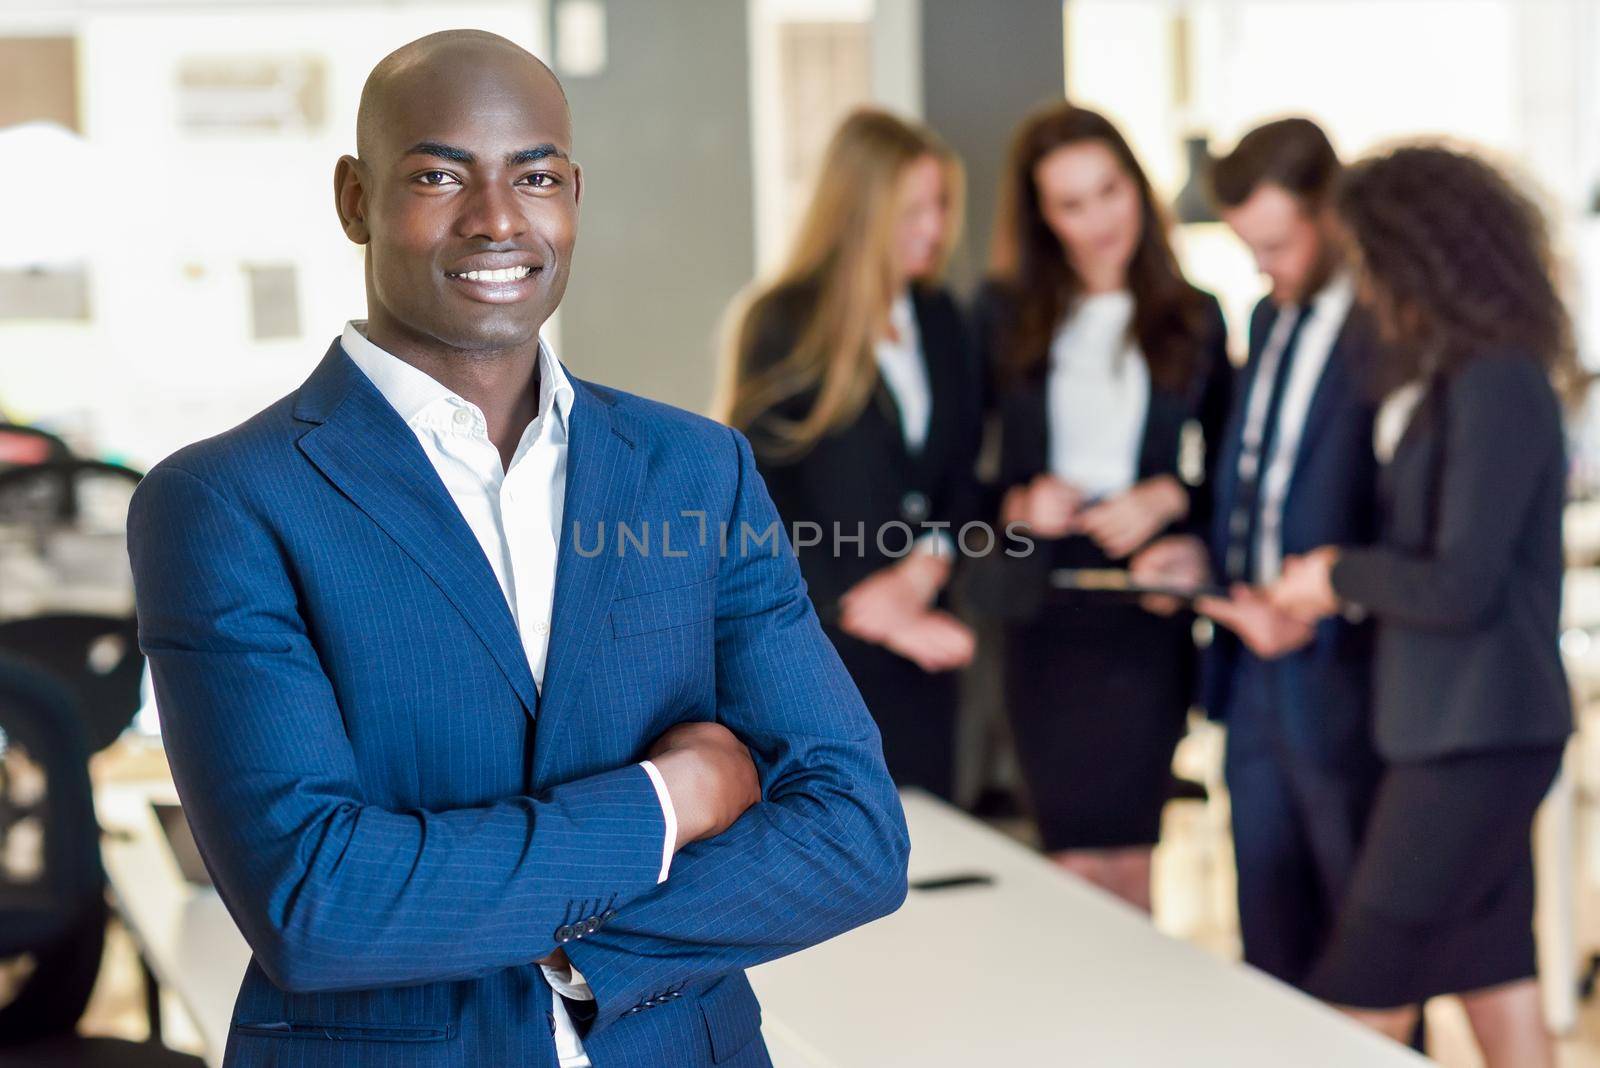 Businessman leader in modern office with businesspeople working at background by javiindy